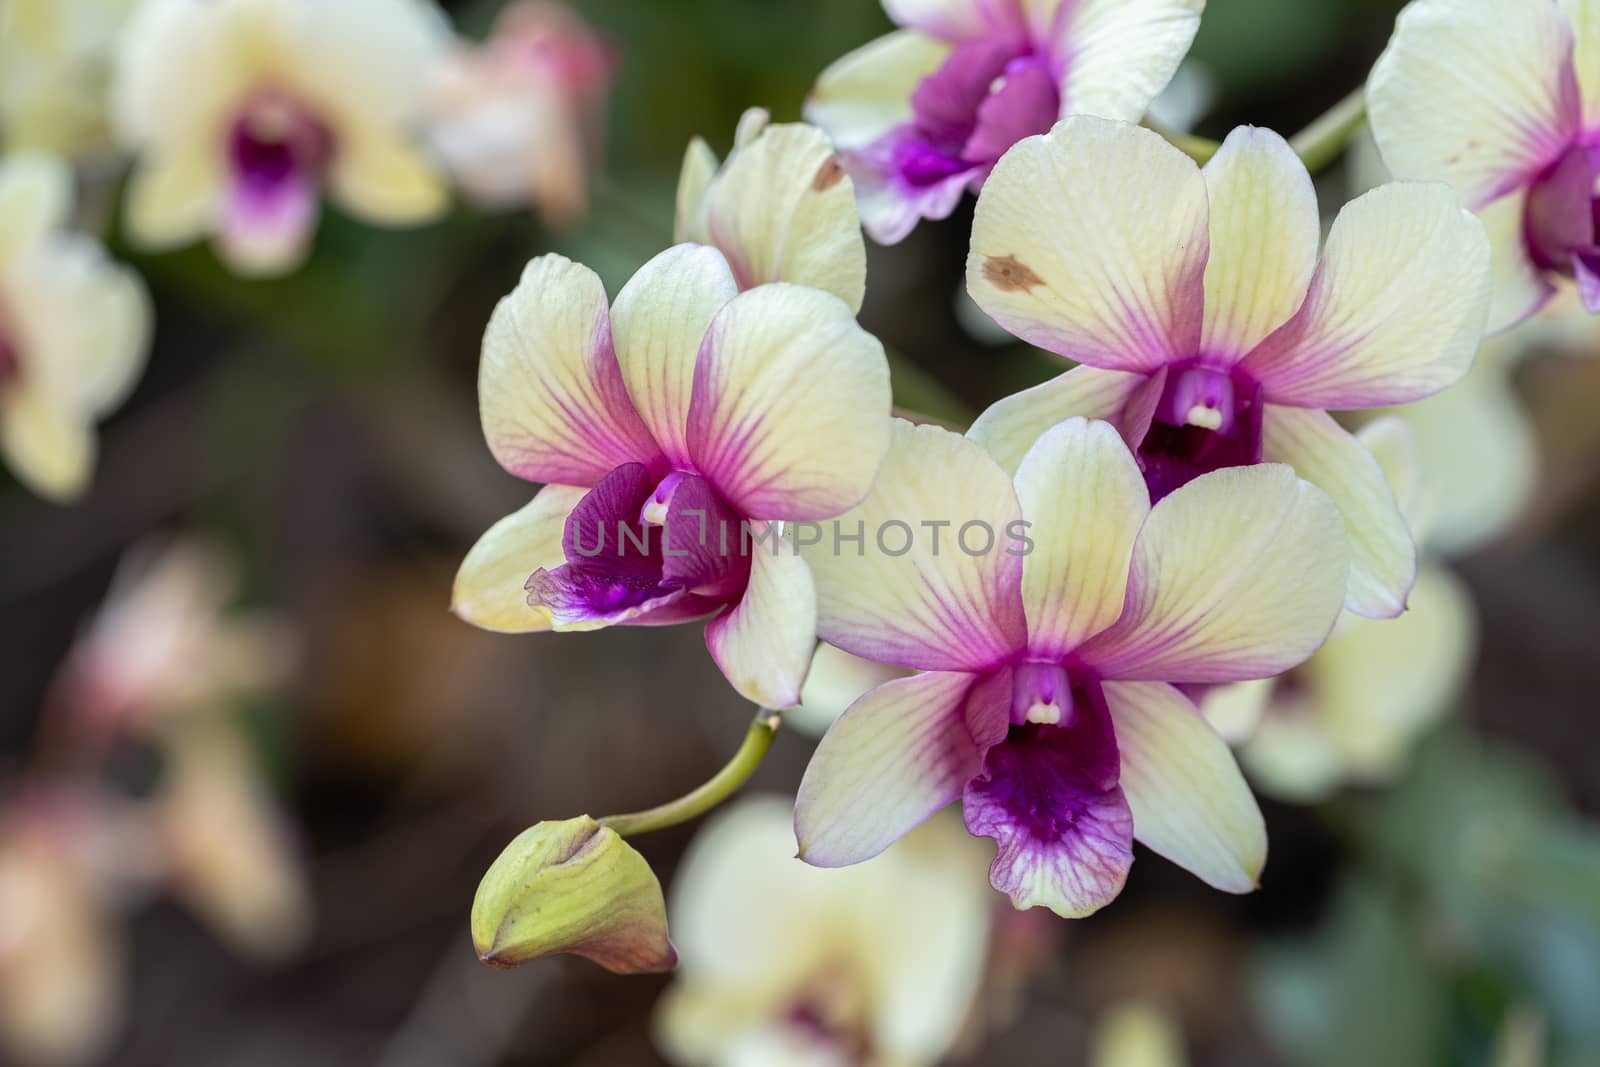 Orchid flower in orchid garden at winter or spring day for beauty and agriculture concept design. Dendrobium Orchidaceae.